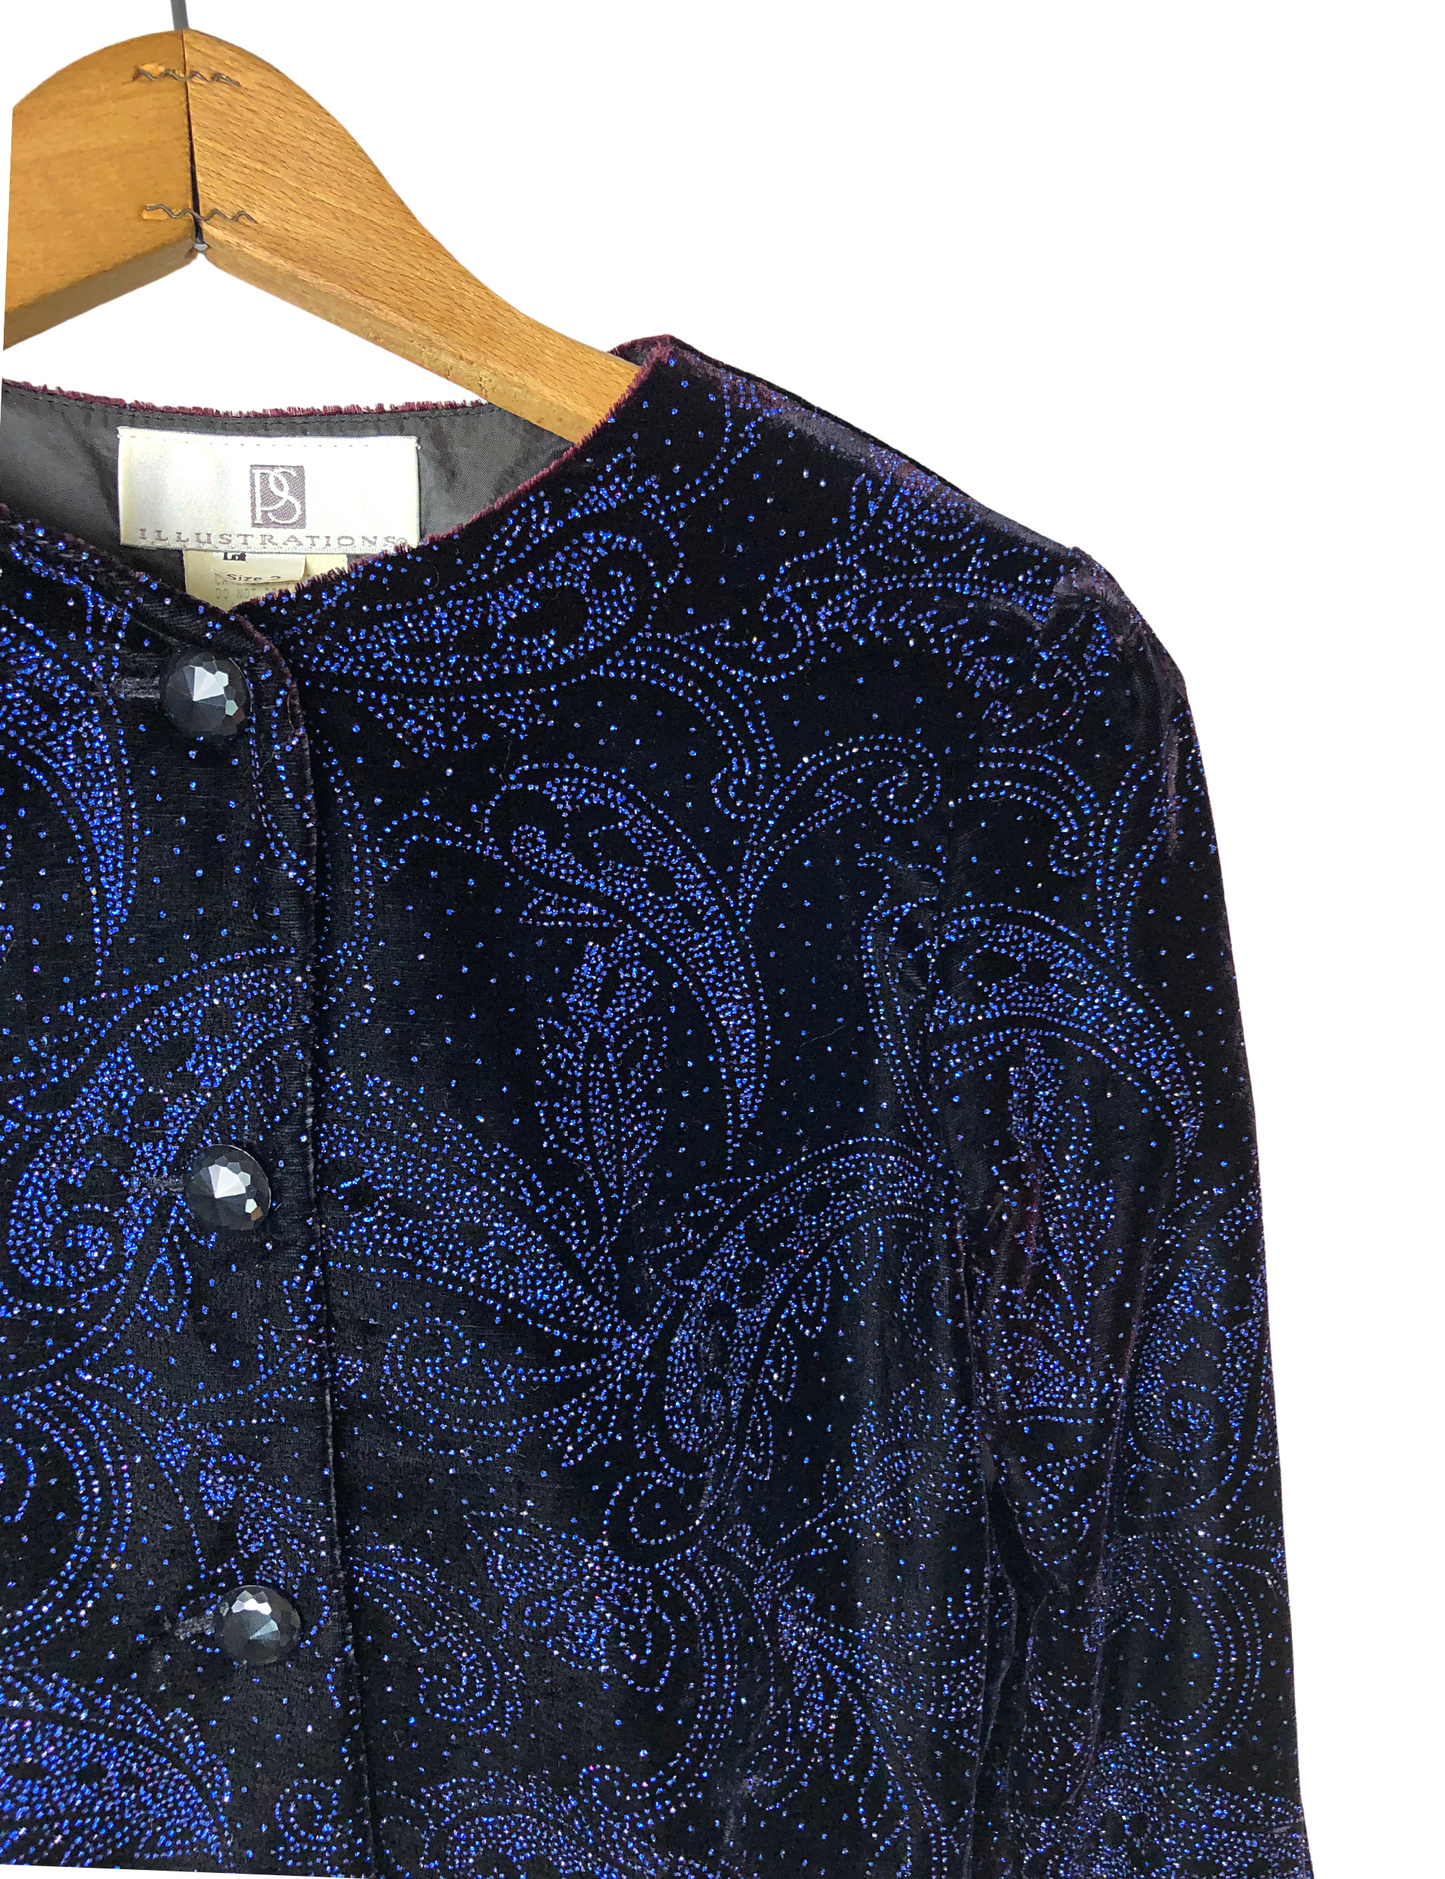 90’s Velvet Sequined Brioche Cropped Ballet Coat Size Small